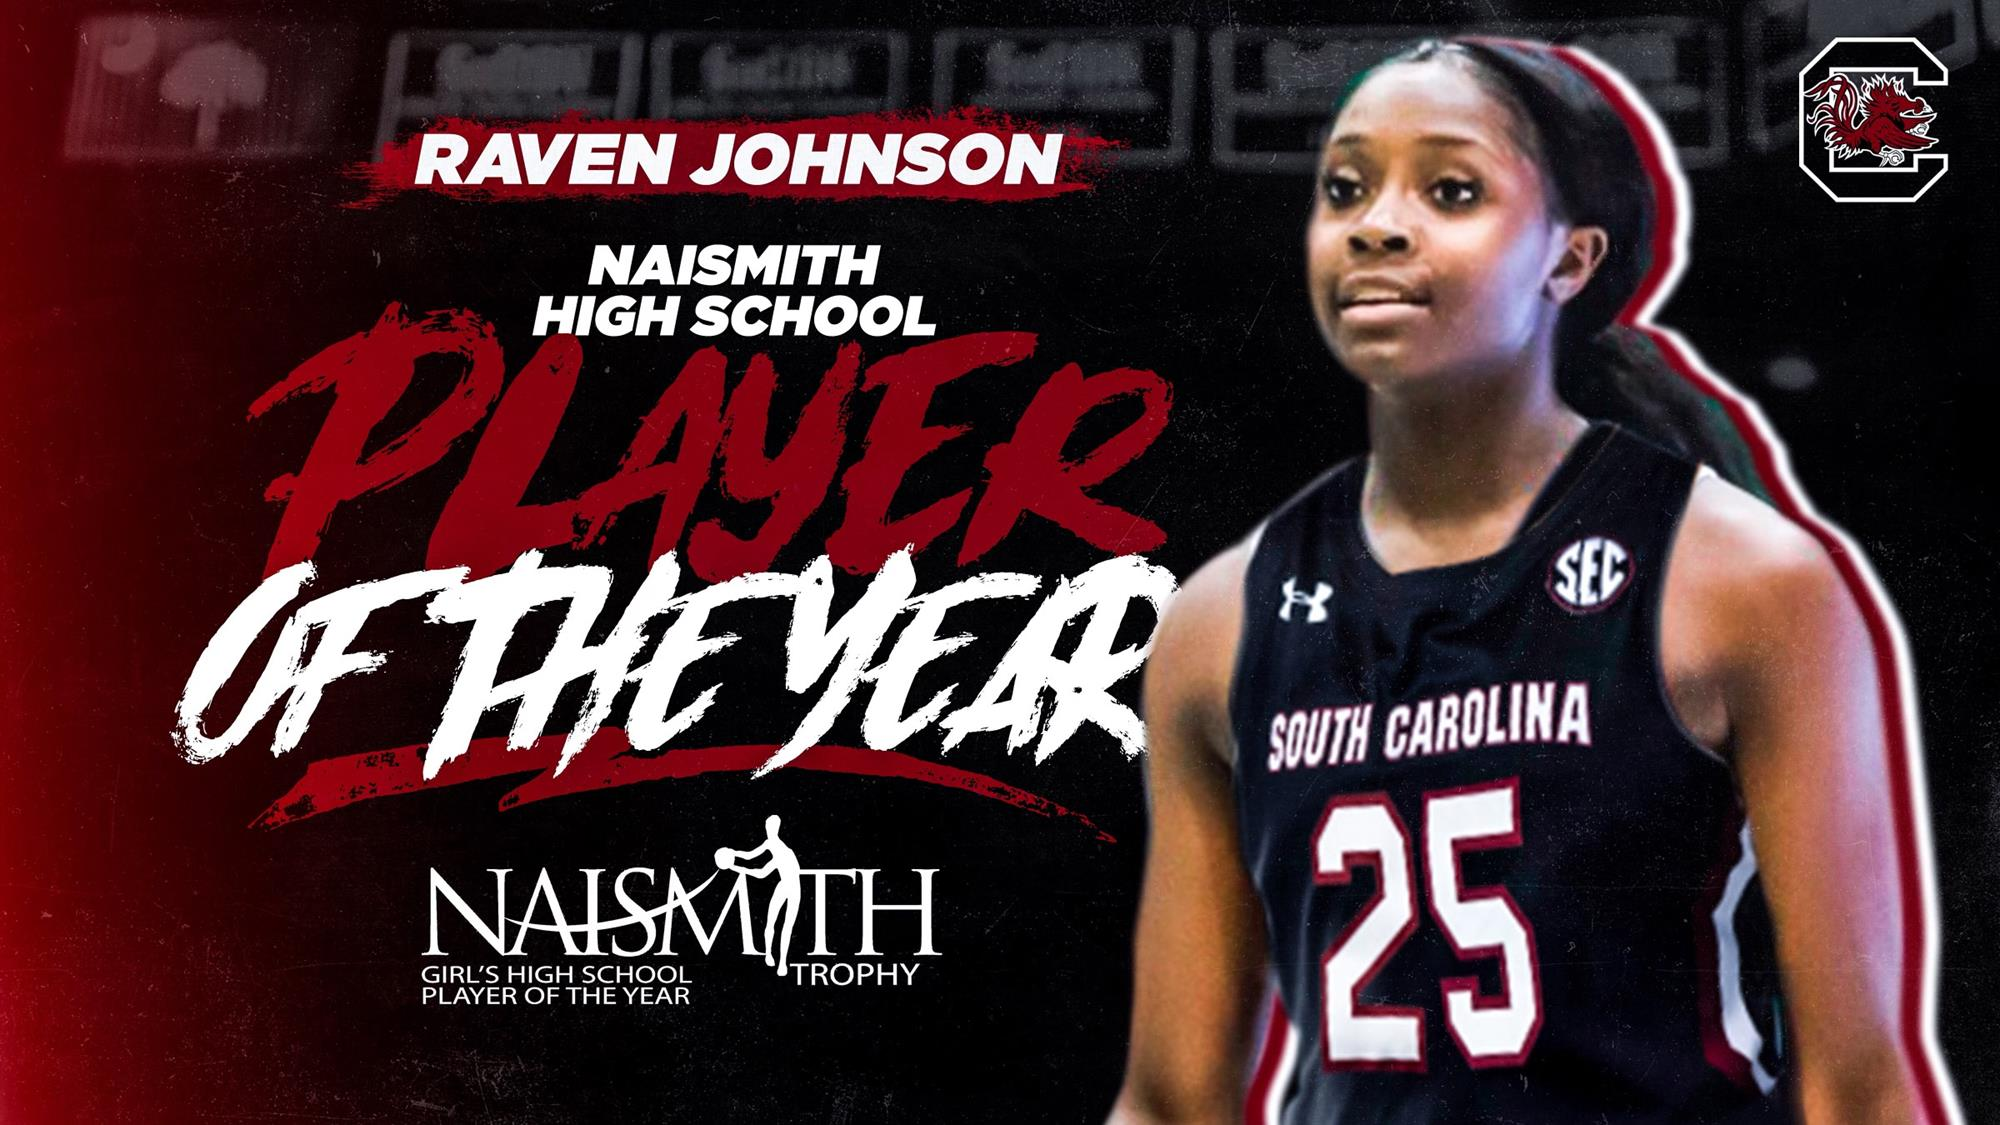 Gamecock Signee Raven Johnson Named Naismith Player of the Year